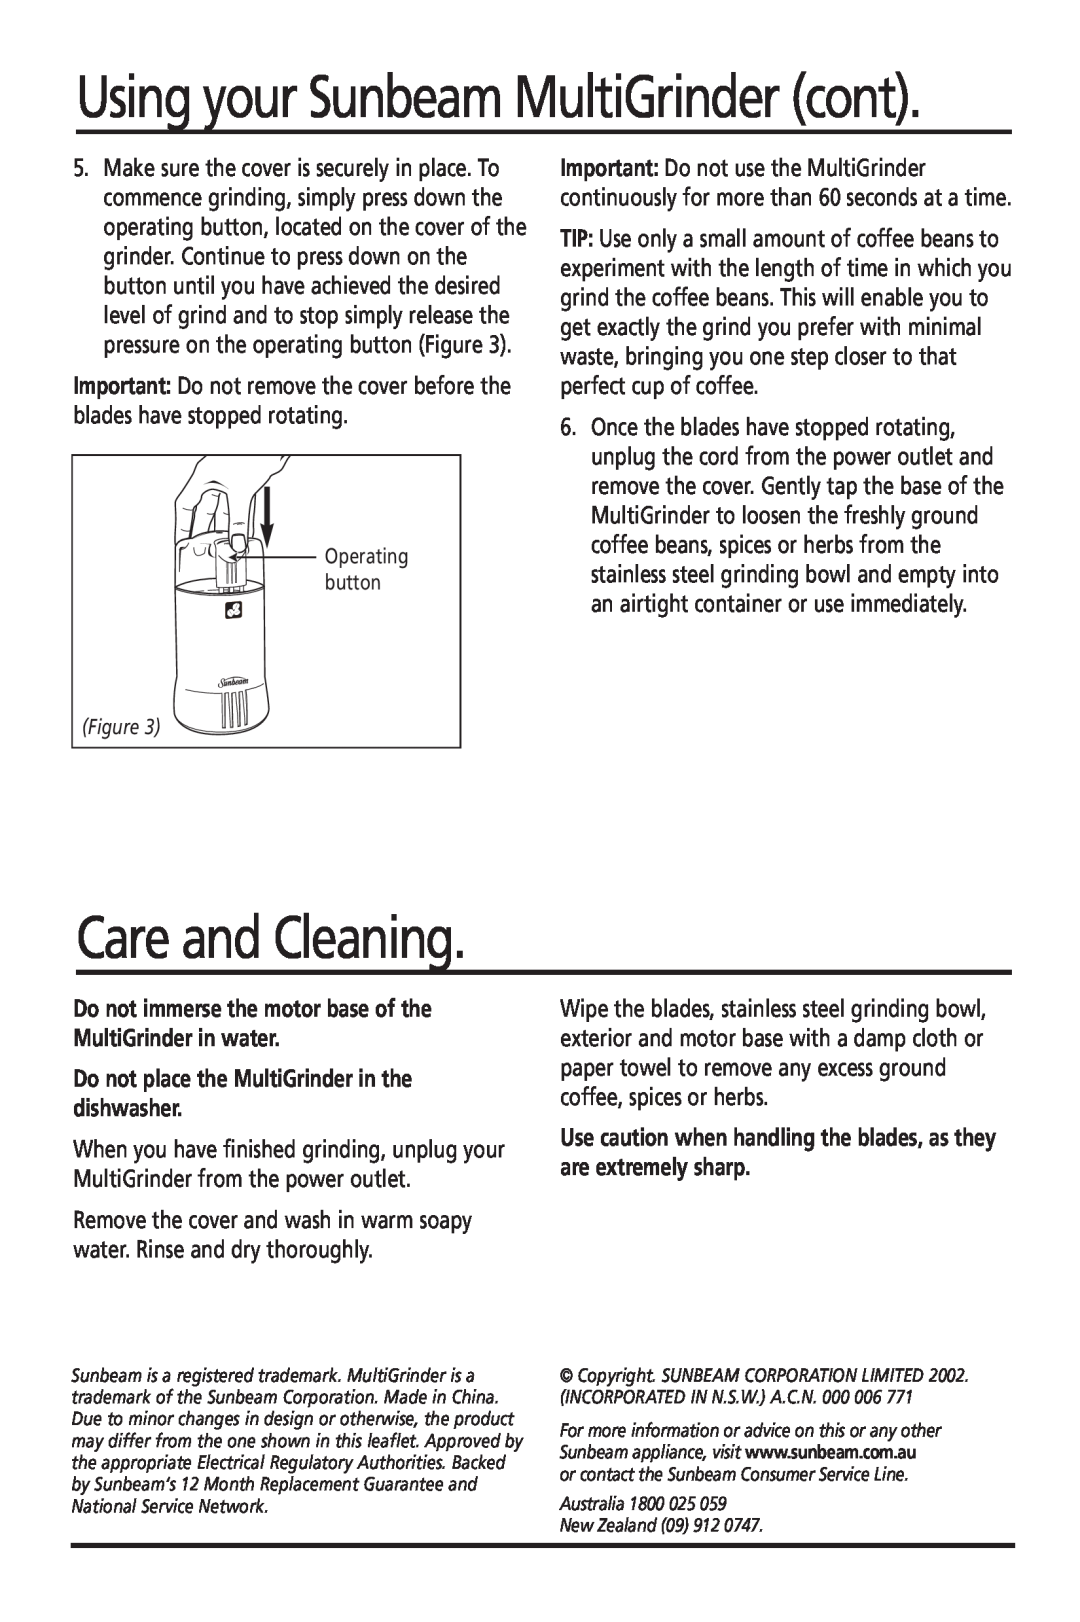 Sunbeam EM0400 manual Care and Cleaning, Using your Sunbeam MultiGrinder cont 